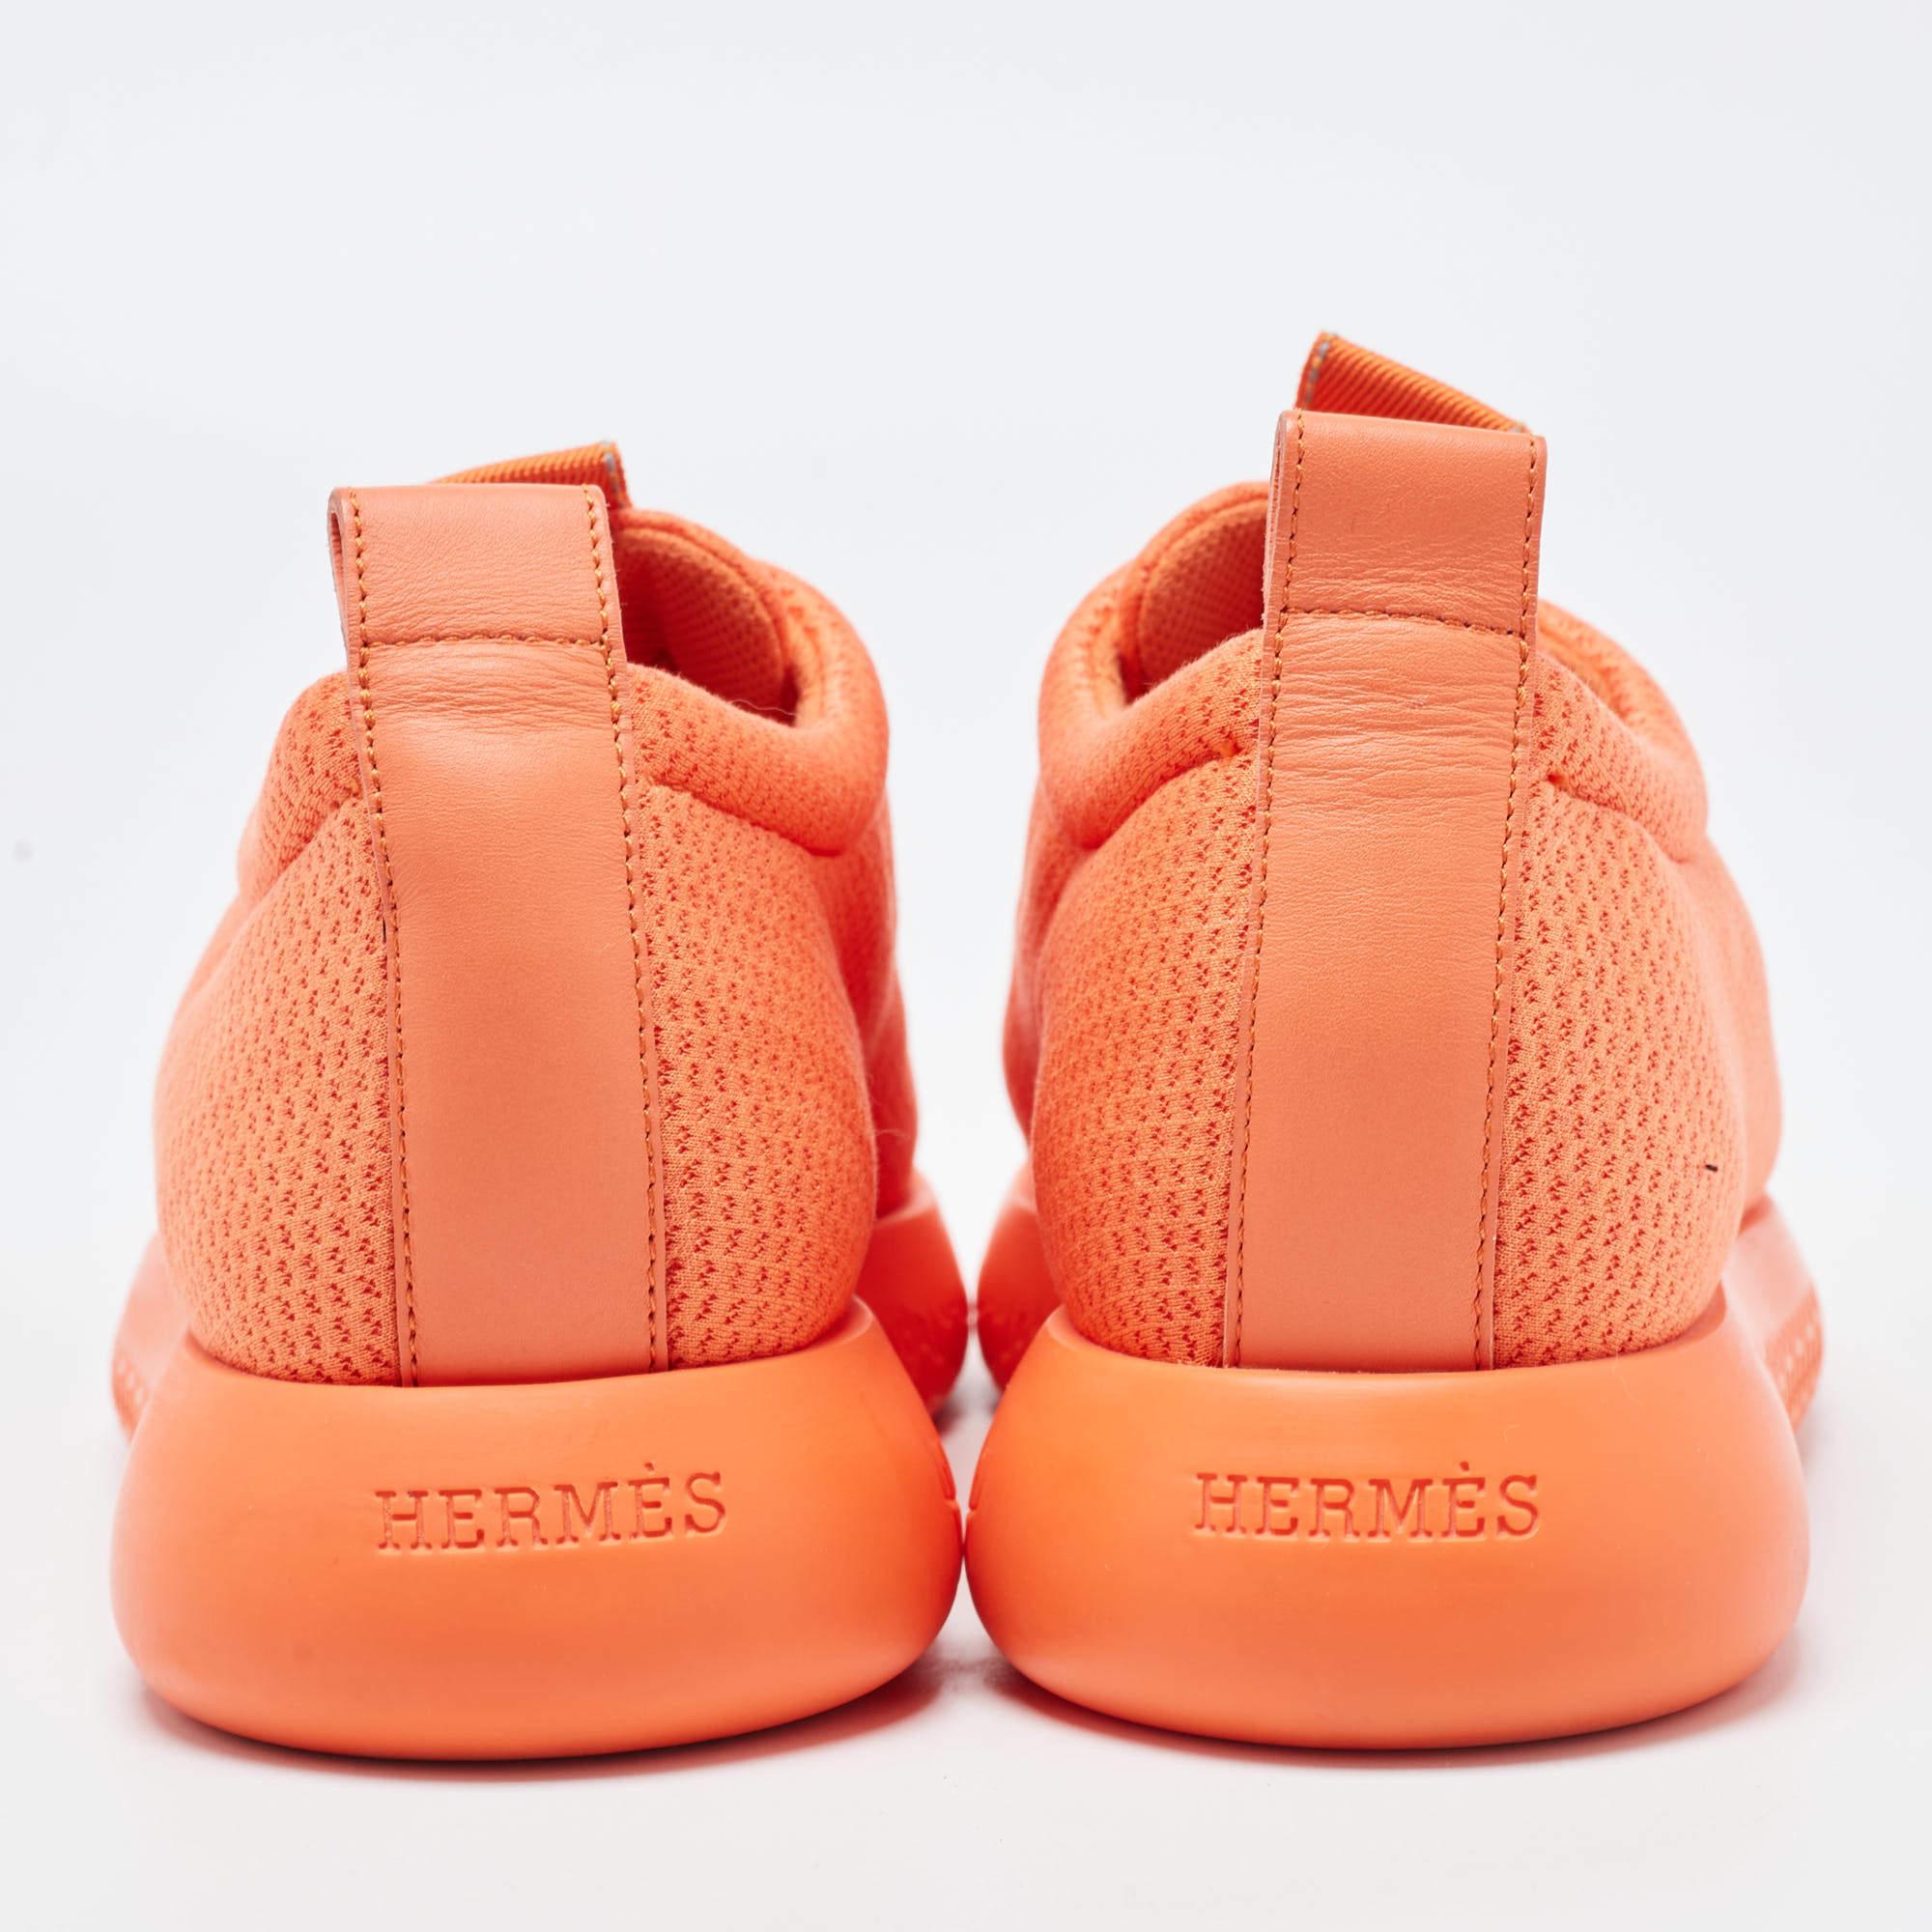 Hermès Orange Leather and Neoprene Low Top Sneakers Size 36 4